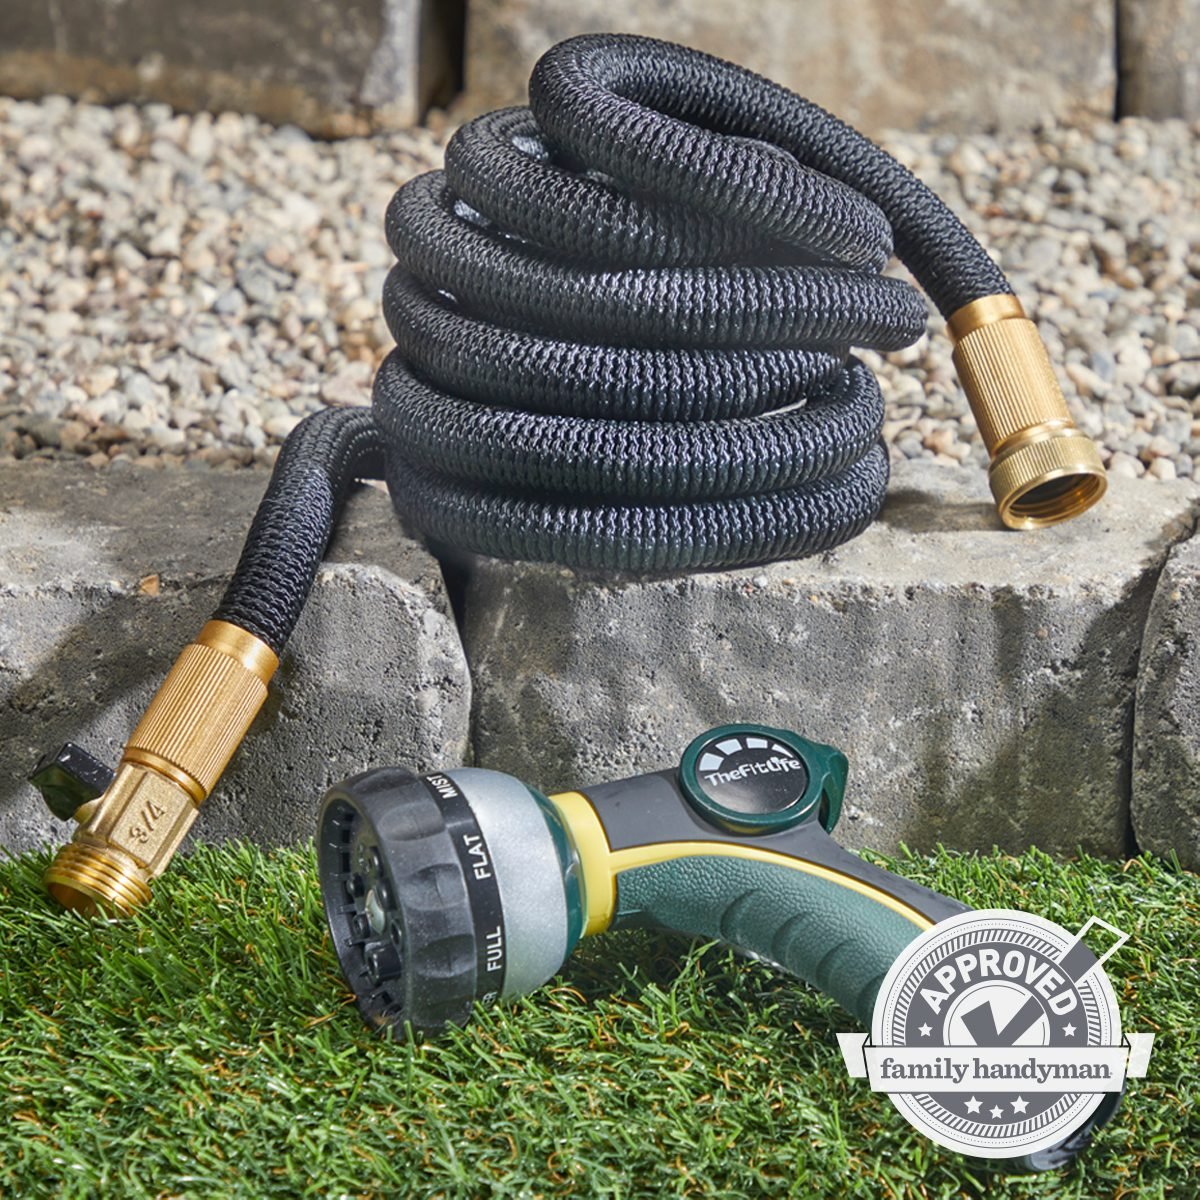 Fitlife Expandable Garden Hose Review